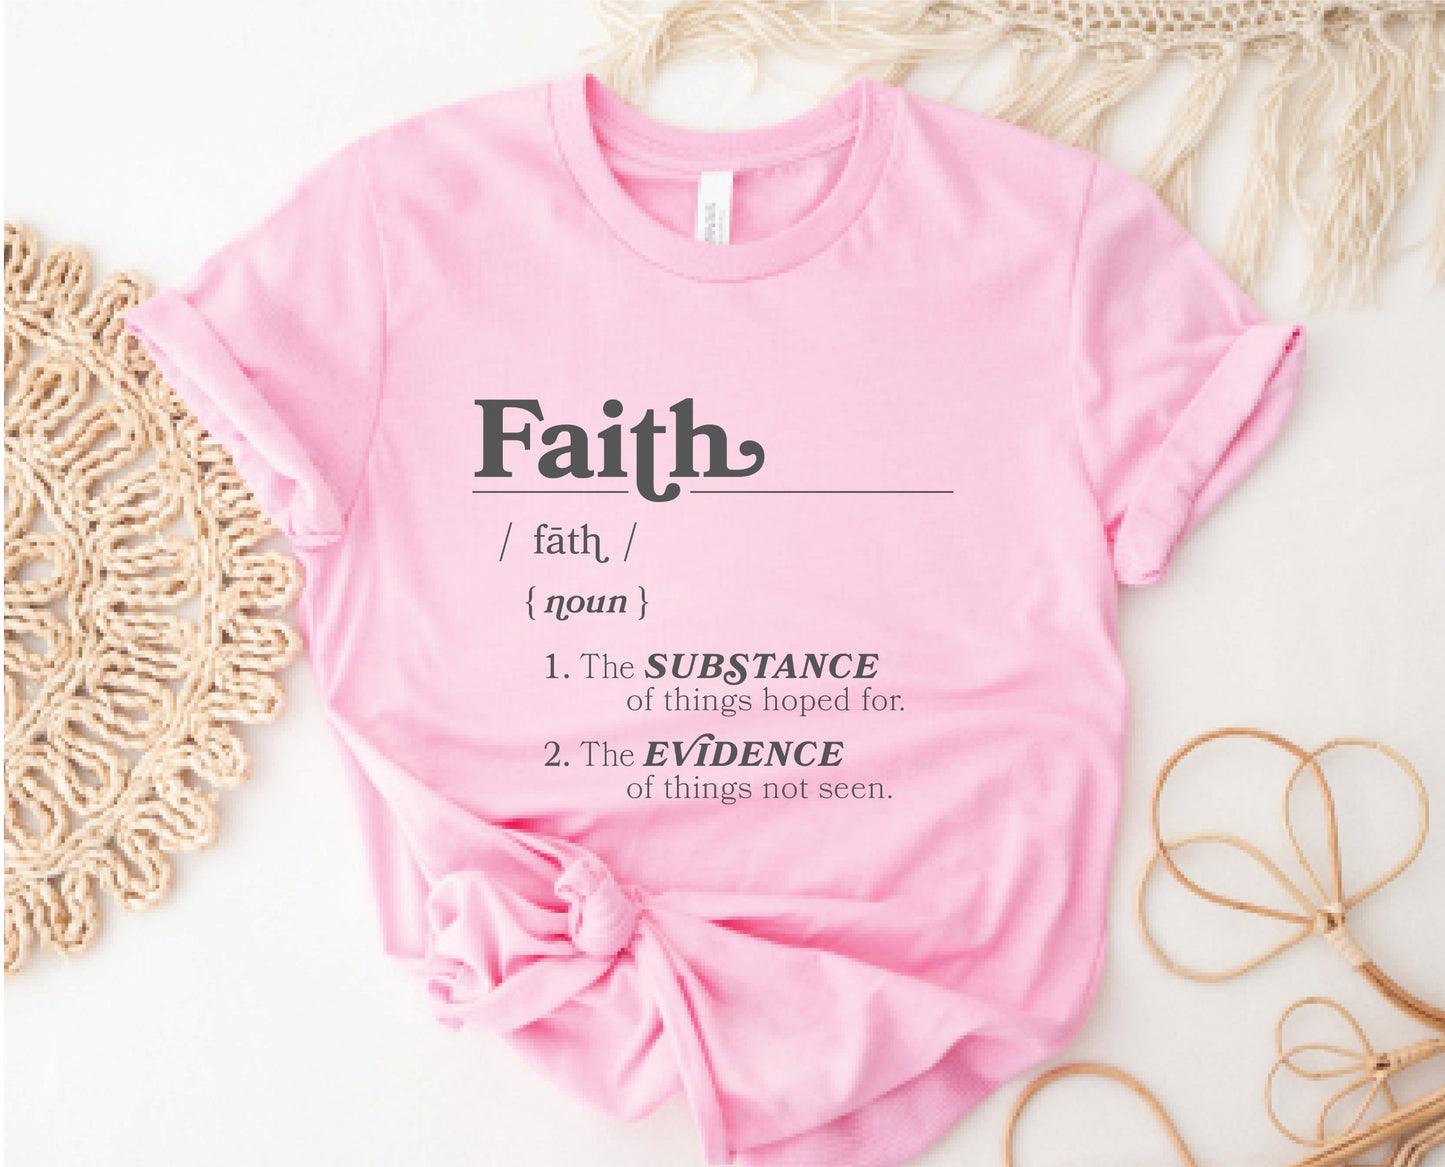 Faith Definition Hebrews 11:1 Christian aesthetic design printed in charcoal gray on soft pink unisex t-shirt for women and men